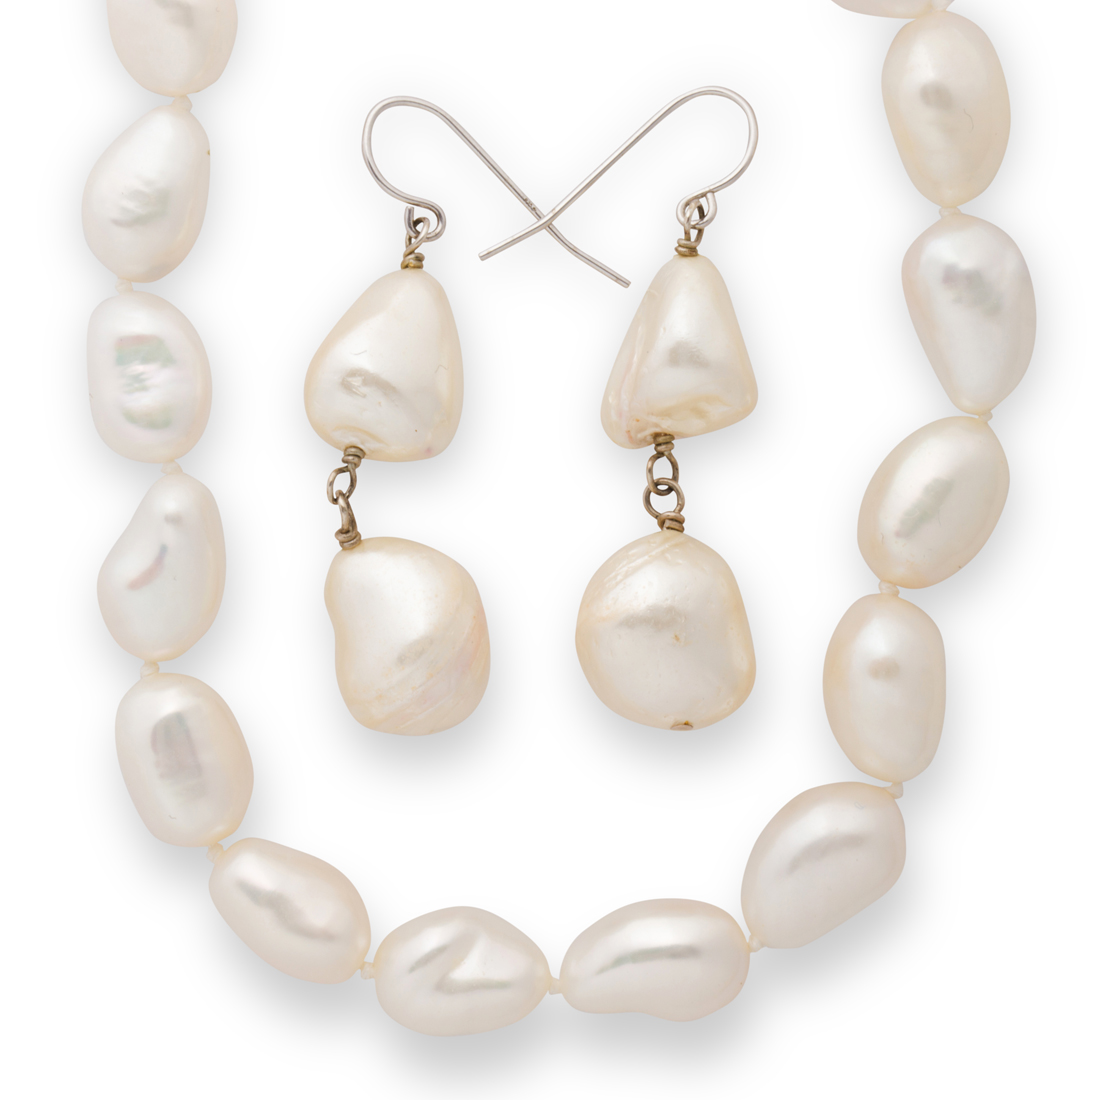 A GROUP OF CULTURED PEARL JEWELRY 3a22a5